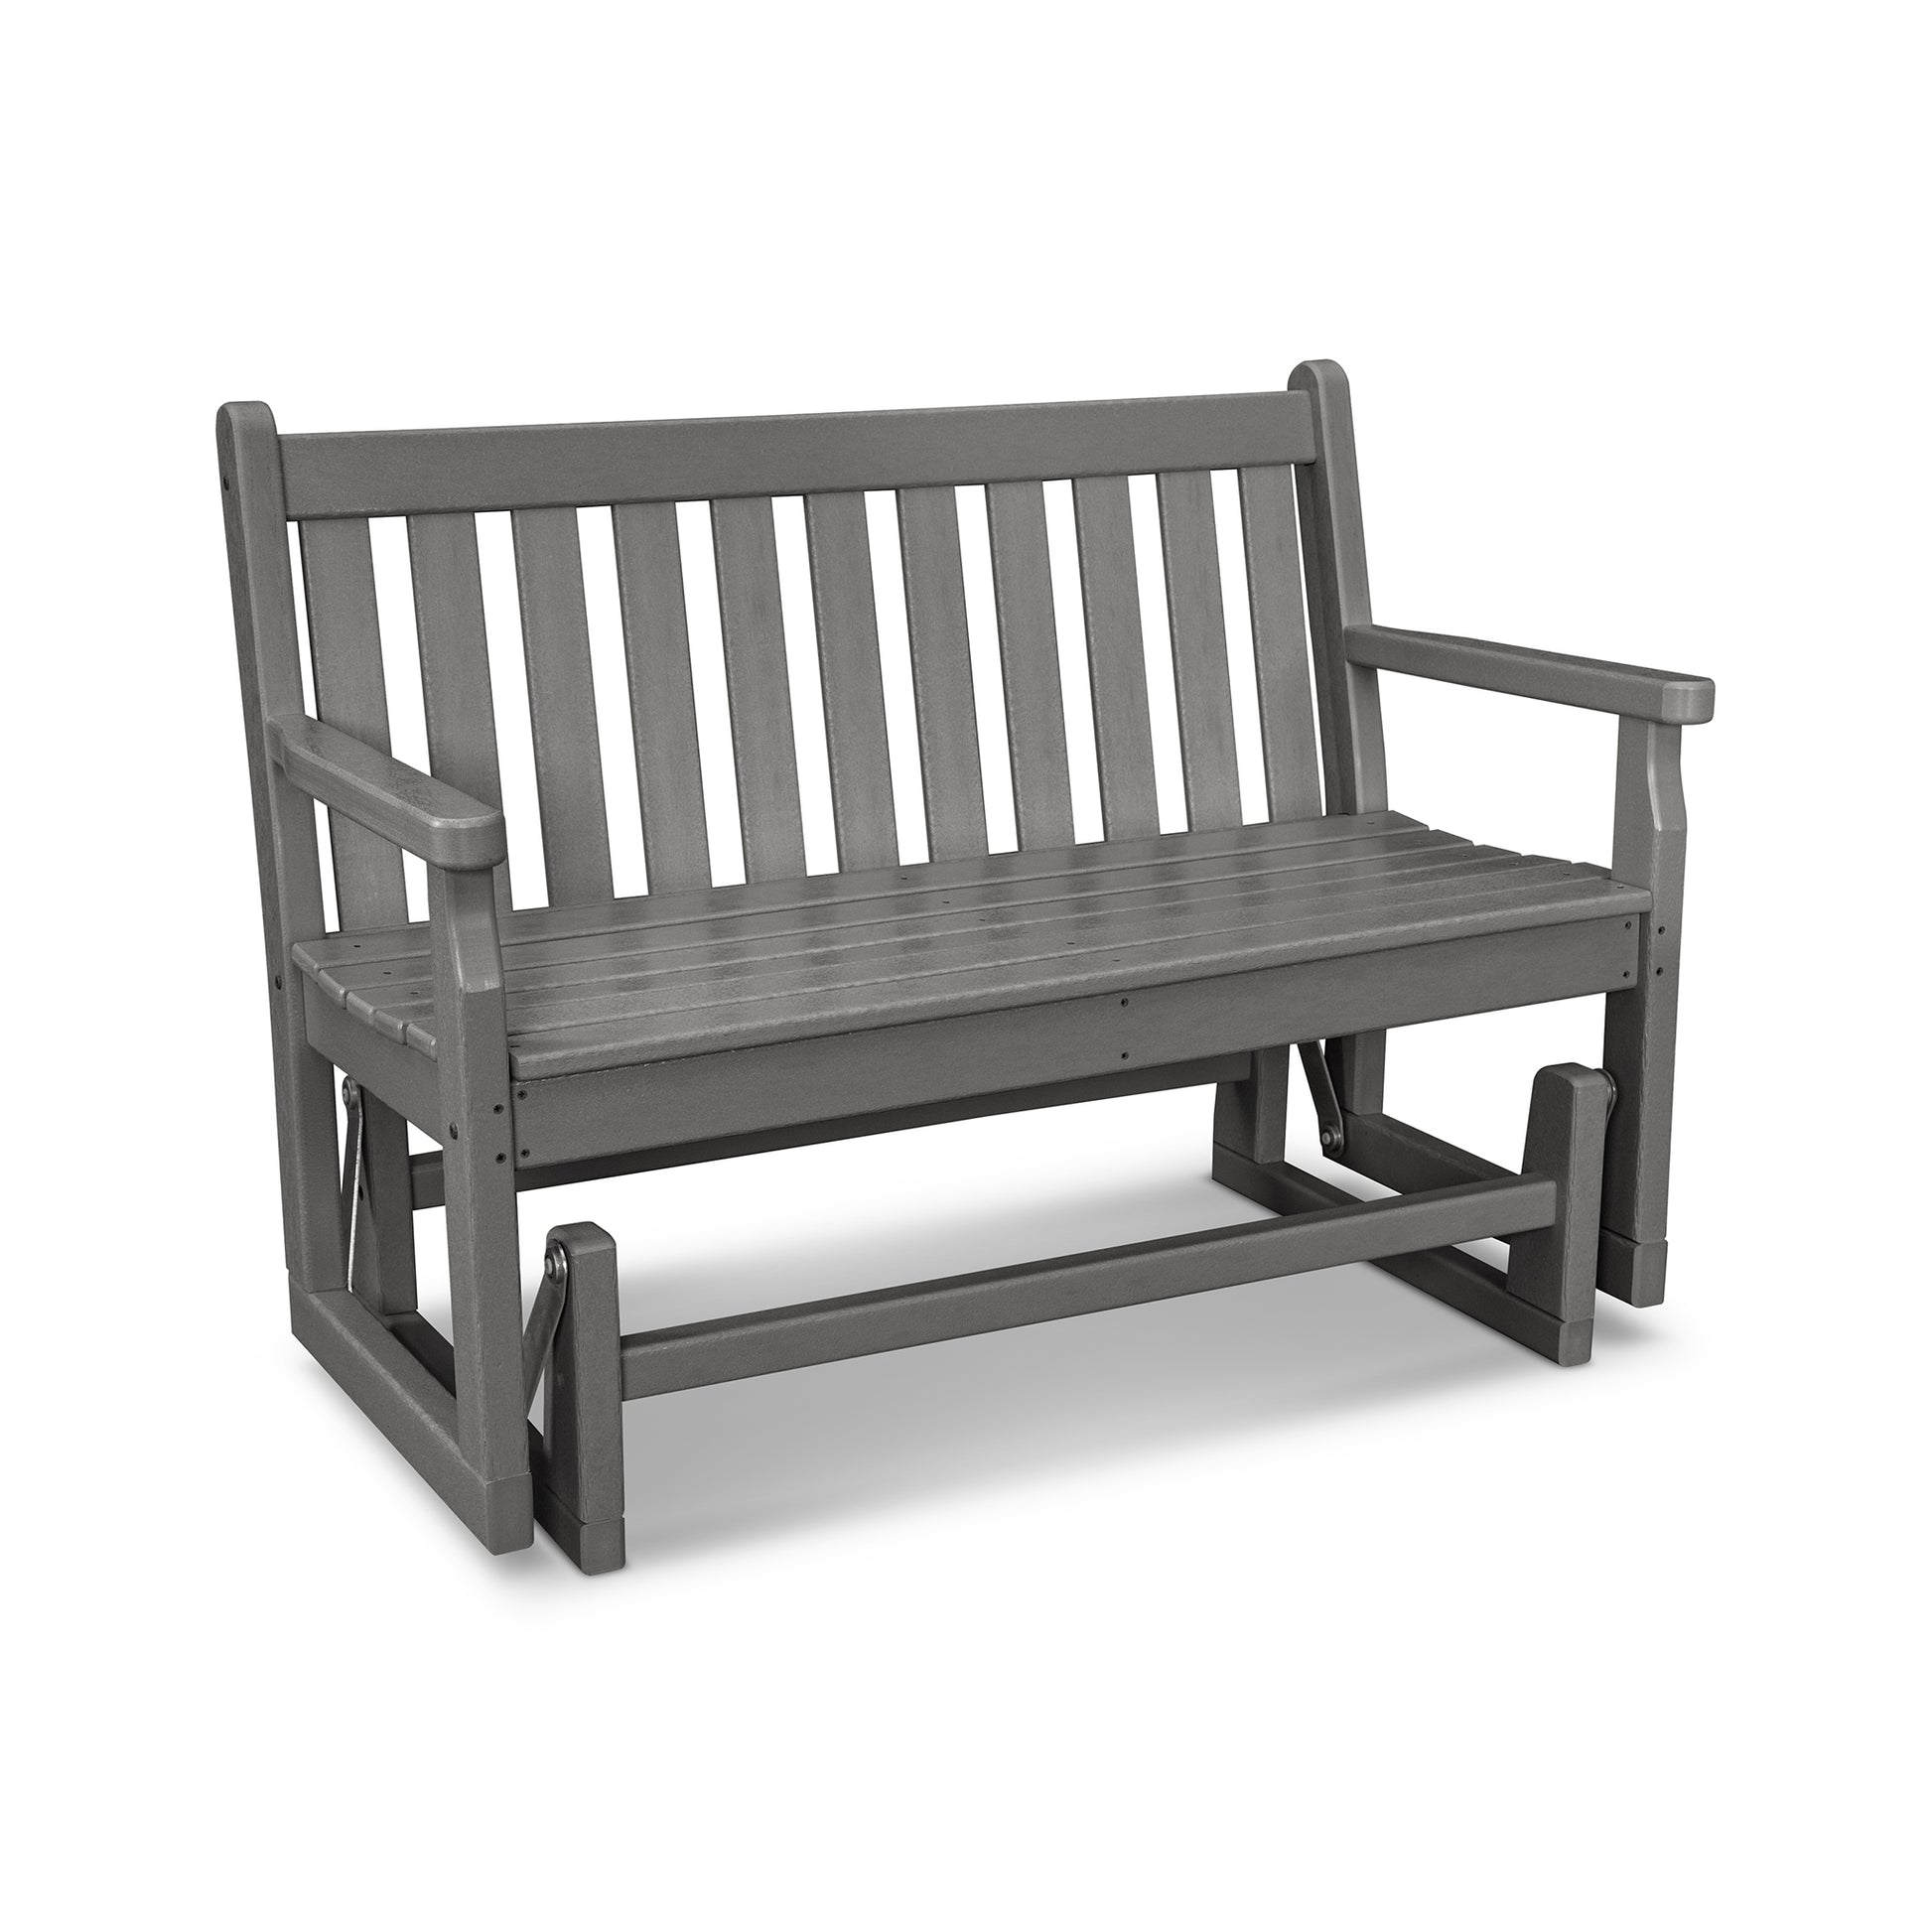 A gray POLYWOOD® Traditional Garden 48" Glider Bench with a high back and armrests, designed for outdoor use, isolated on a white background.